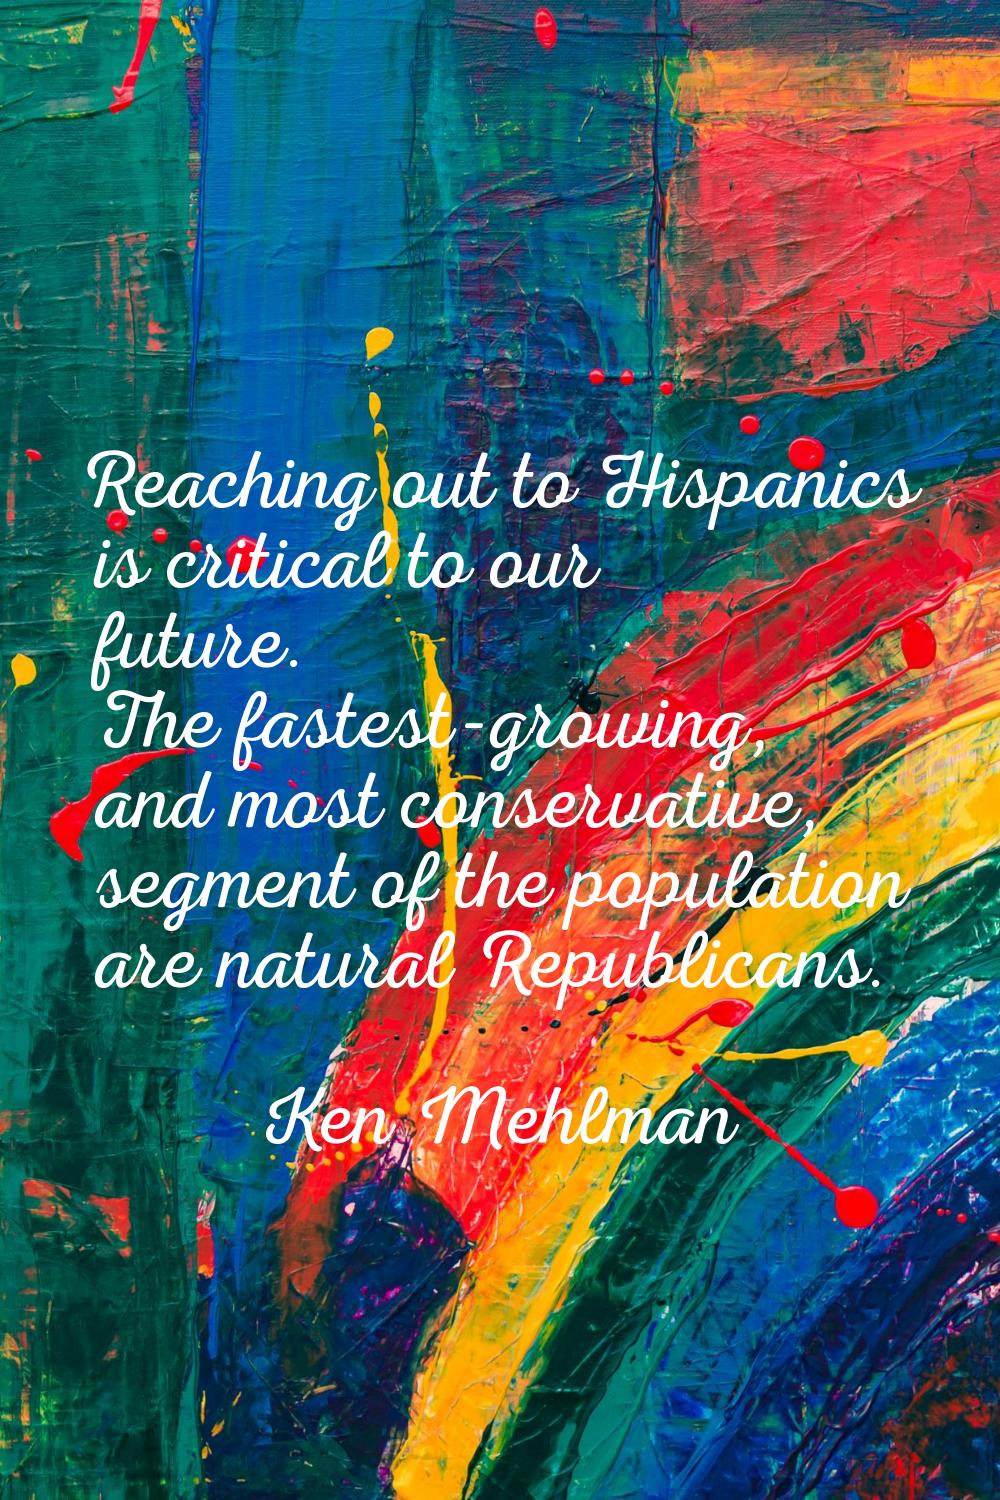 Reaching out to Hispanics is critical to our future. The fastest-growing, and most conservative, se